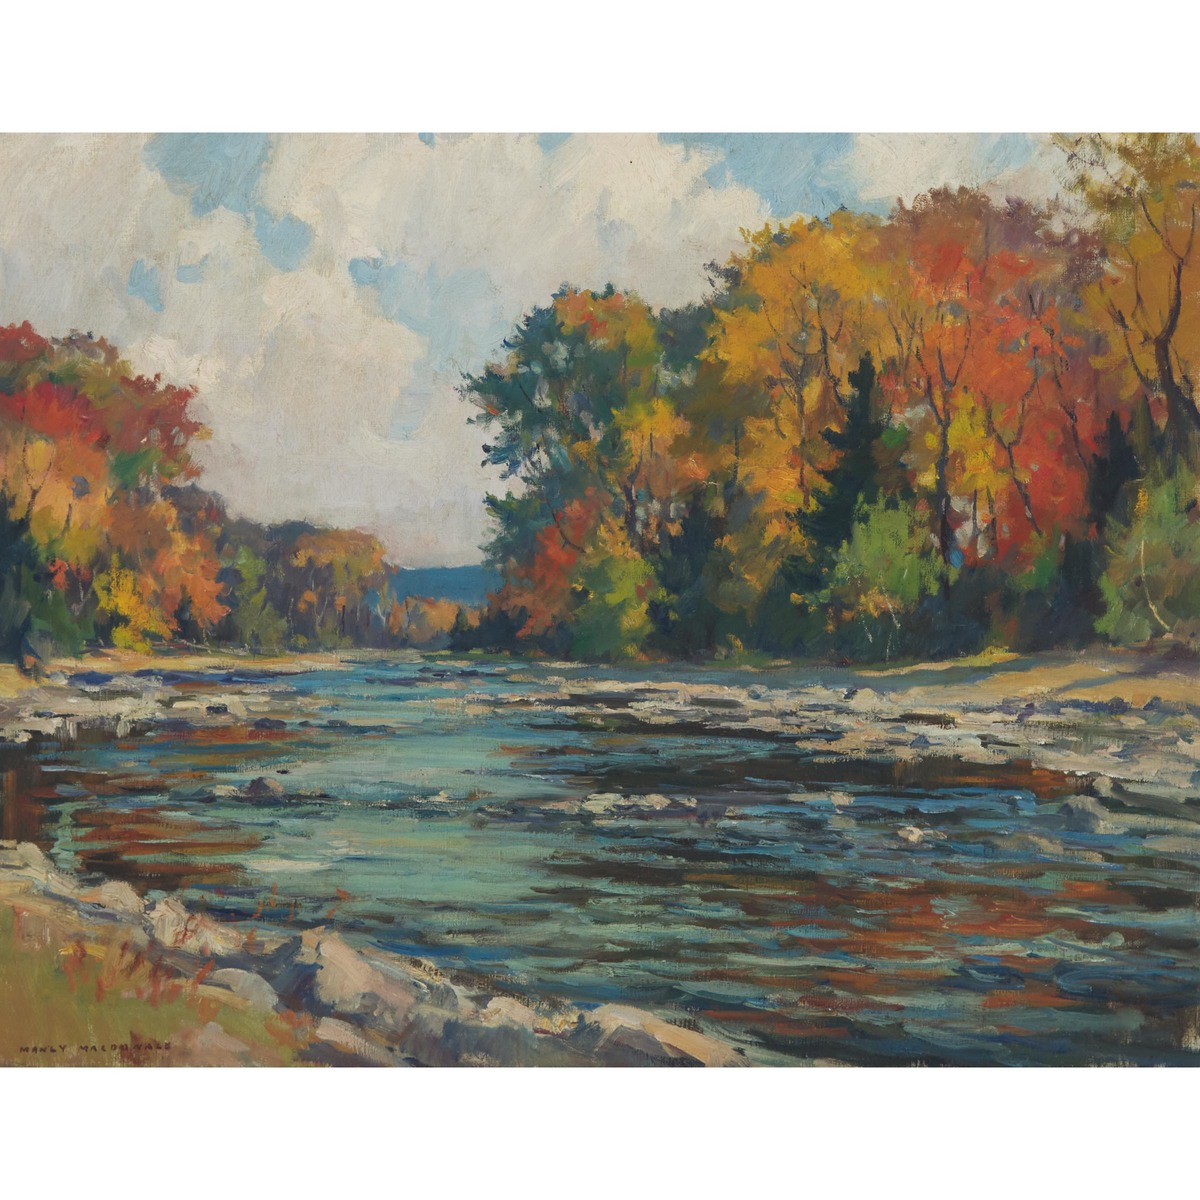 Manly Edward MacDonald, OSA, RCA (1889-1971), AUTUMN ON THE MOIRA RIVER, 28.5 x 36.5 in — 72.4 x 92. - Image 2 of 4